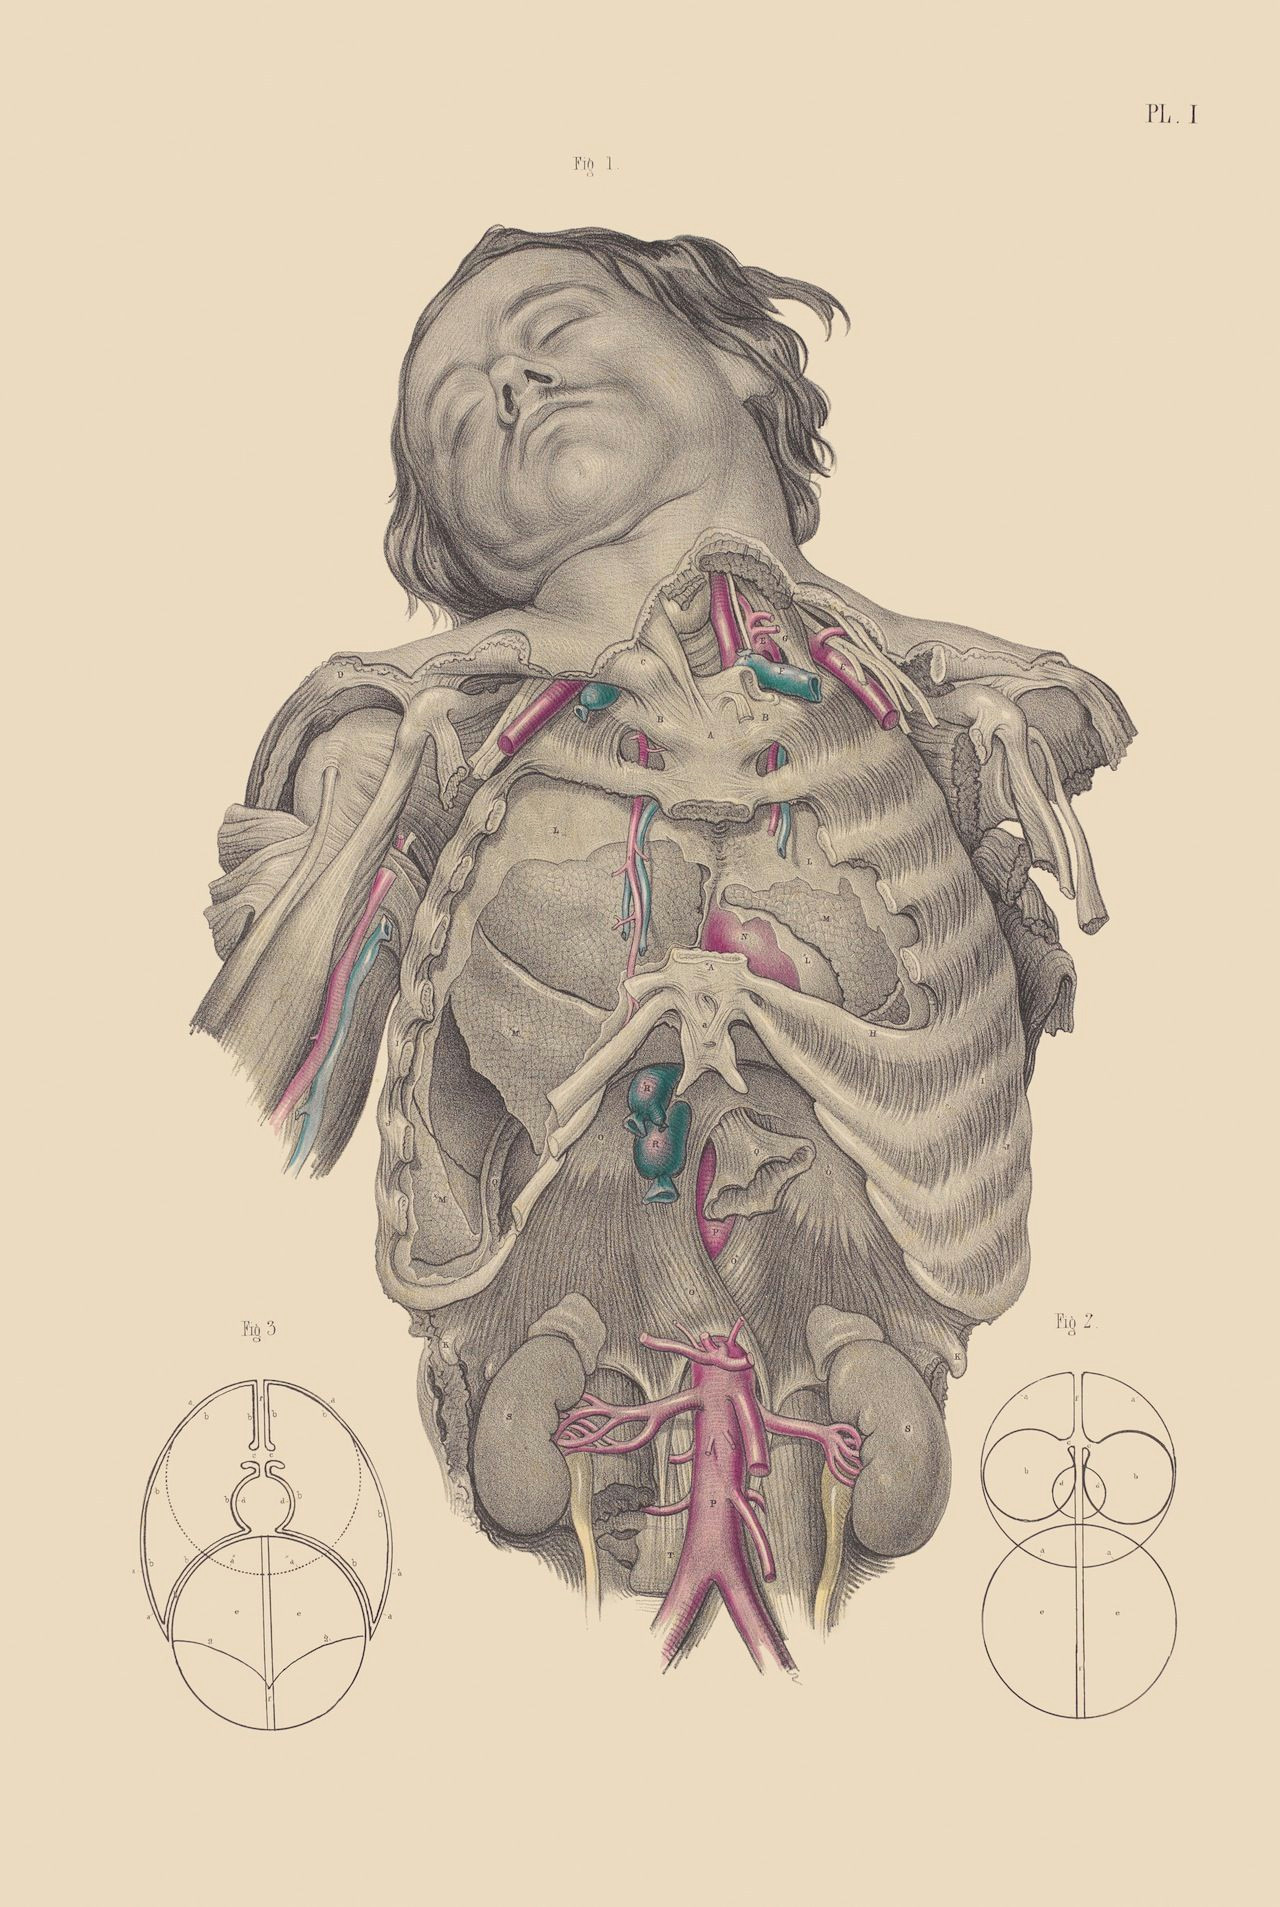 dissection of the thorax showing the relative position of the lungs heart and primary blood vessels gruesome and surreal surgical illustrations from the